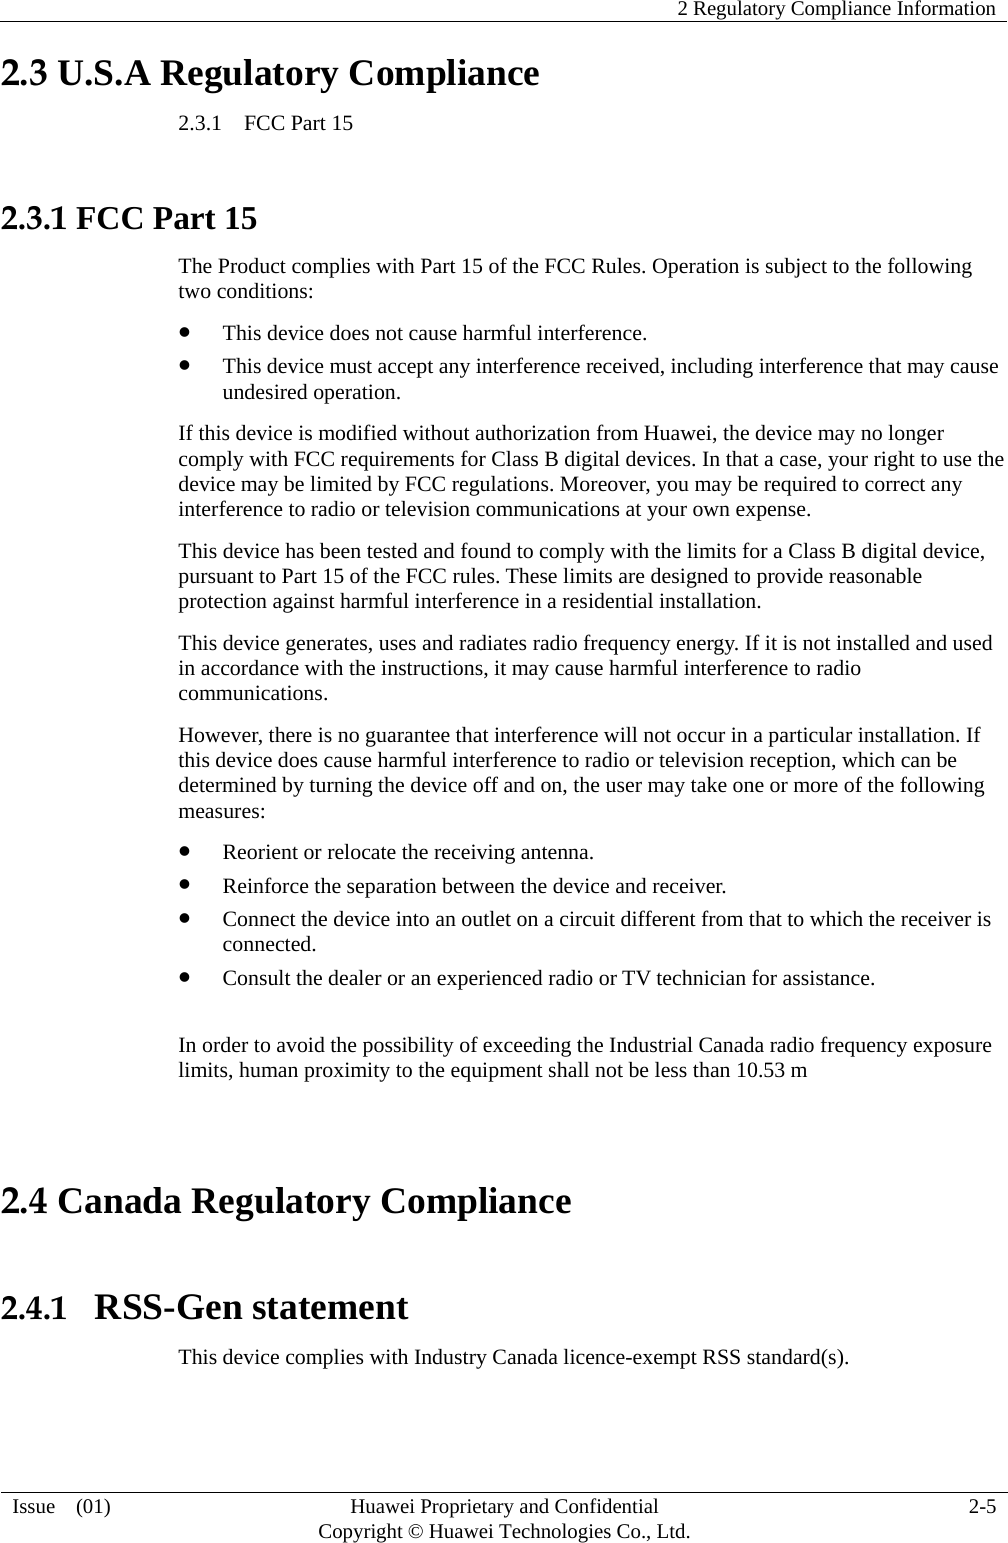    2 Regulatory Compliance Information   Issue  (01)  Huawei Proprietary and Confidential     Copyright © Huawei Technologies Co., Ltd.  2-5  2.3 U.S.A Regulatory Compliance 2.3.1  FCC Part 15  2.3.1 FCC Part 15 The Product complies with Part 15 of the FCC Rules. Operation is subject to the following two conditions:  This device does not cause harmful interference.  This device must accept any interference received, including interference that may cause undesired operation. If this device is modified without authorization from Huawei, the device may no longer comply with FCC requirements for Class B digital devices. In that a case, your right to use the device may be limited by FCC regulations. Moreover, you may be required to correct any interference to radio or television communications at your own expense. This device has been tested and found to comply with the limits for a Class B digital device, pursuant to Part 15 of the FCC rules. These limits are designed to provide reasonable protection against harmful interference in a residential installation. This device generates, uses and radiates radio frequency energy. If it is not installed and used in accordance with the instructions, it may cause harmful interference to radio communications. However, there is no guarantee that interference will not occur in a particular installation. If this device does cause harmful interference to radio or television reception, which can be determined by turning the device off and on, the user may take one or more of the following measures:  Reorient or relocate the receiving antenna.  Reinforce the separation between the device and receiver.  Connect the device into an outlet on a circuit different from that to which the receiver is connected.  Consult the dealer or an experienced radio or TV technician for assistance.  In order to avoid the possibility of exceeding the Industrial Canada radio frequency exposure limits, human proximity to the equipment shall not be less than 10.53 m  2.4 Canada Regulatory Compliance  2.4.1  RSS-Gen statement This device complies with Industry Canada licence-exempt RSS standard(s). 